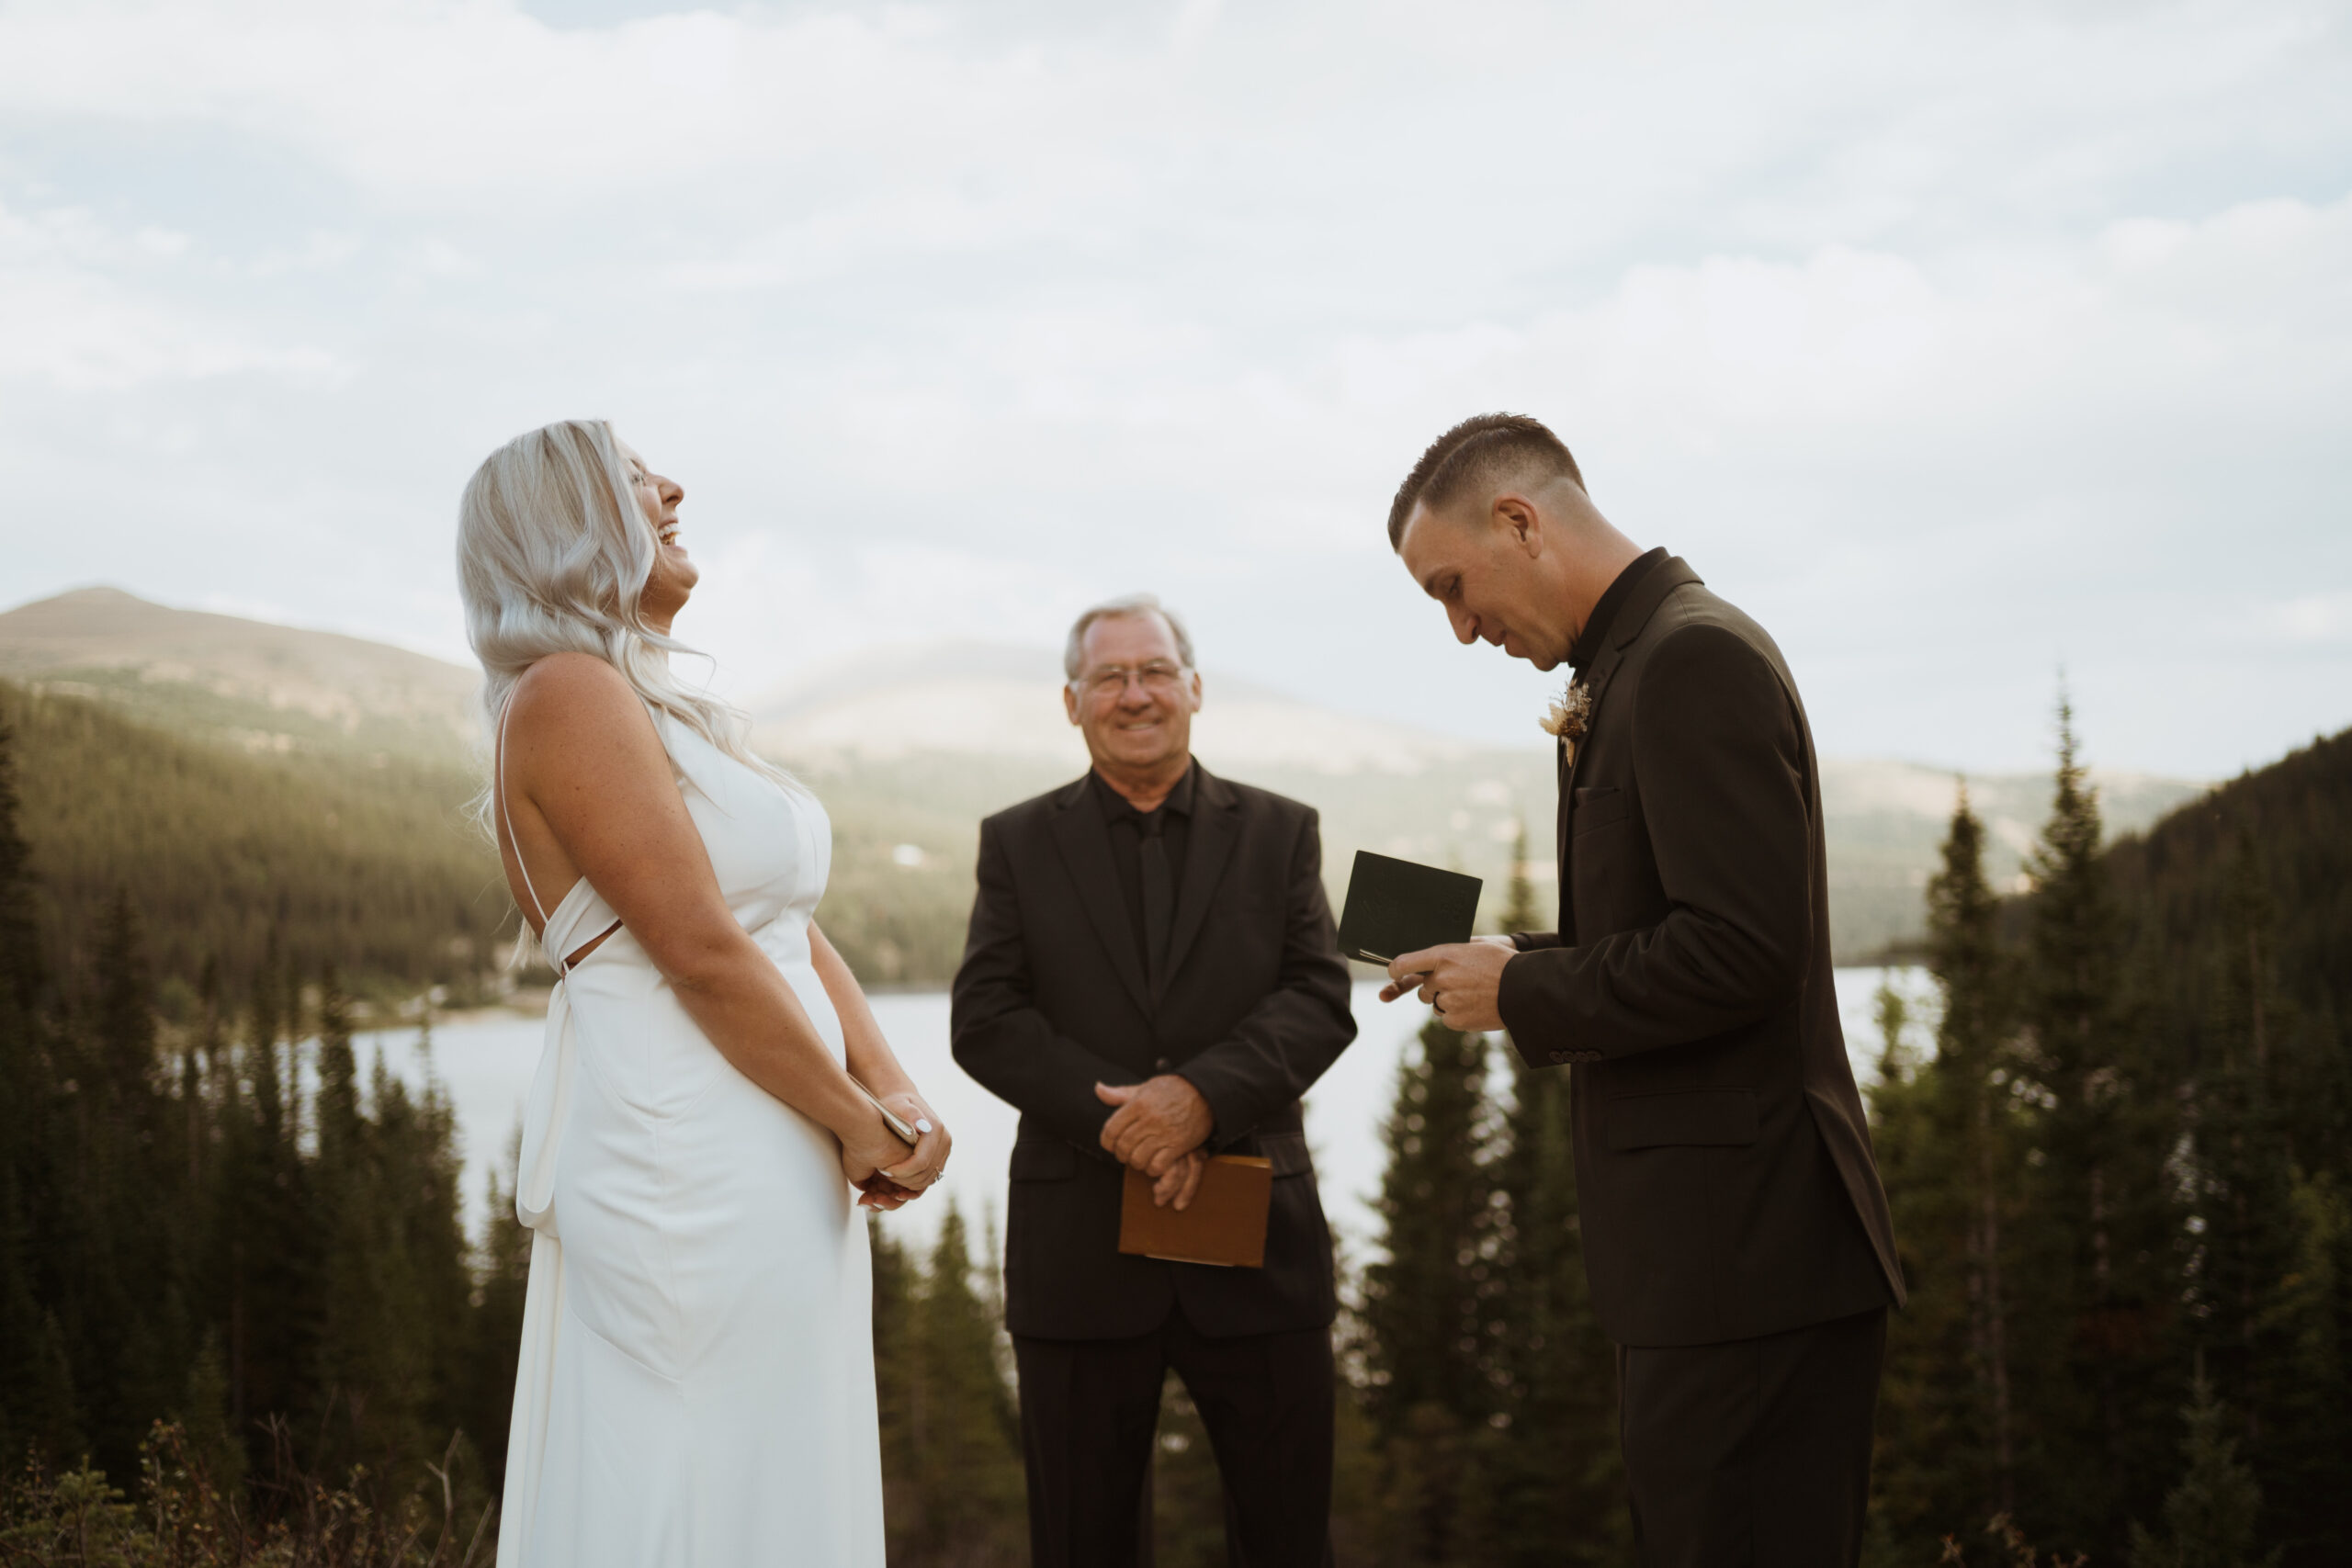 intimate elopement ceremony overlooking an alpine lake. portraits with family and friends, after party, and hiking.